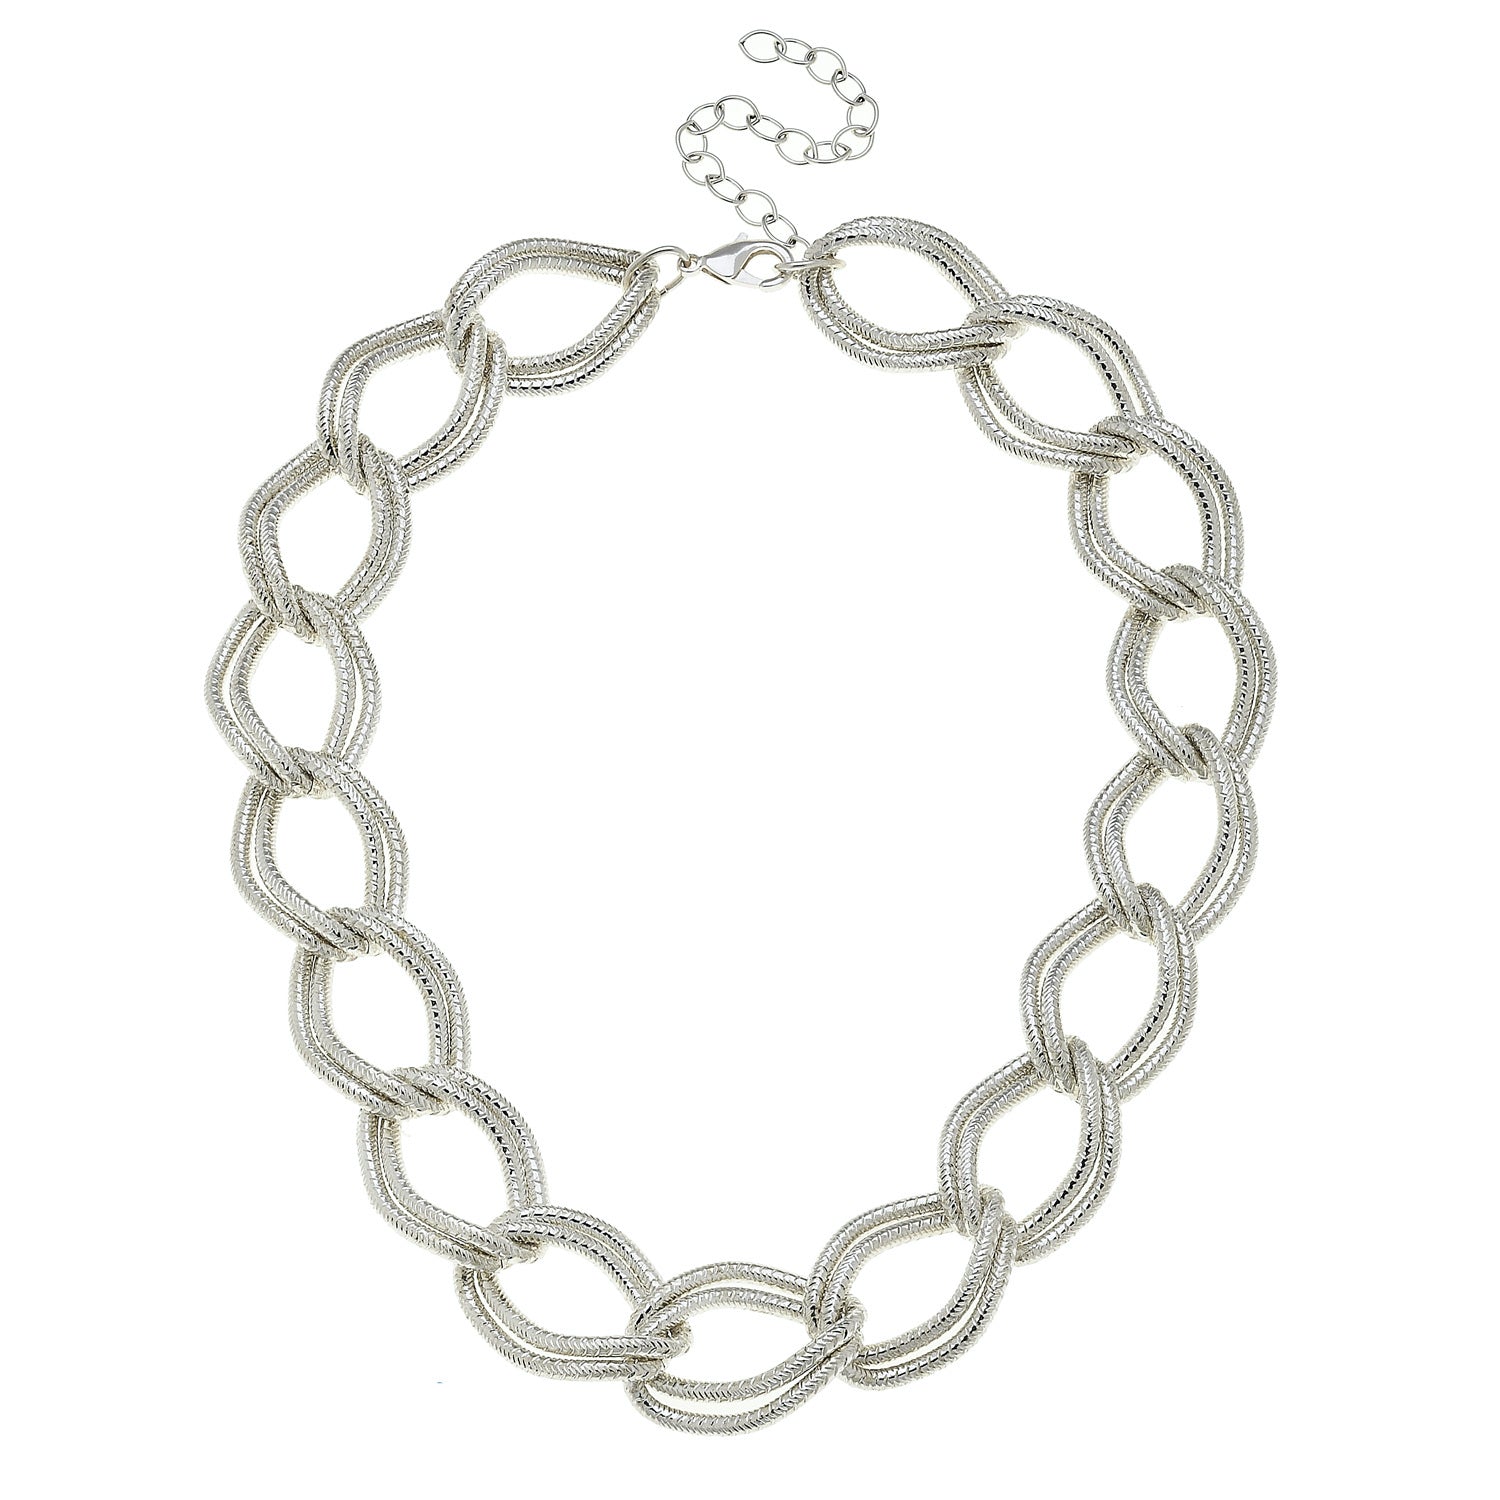 Double Linked Loop Chain Necklace